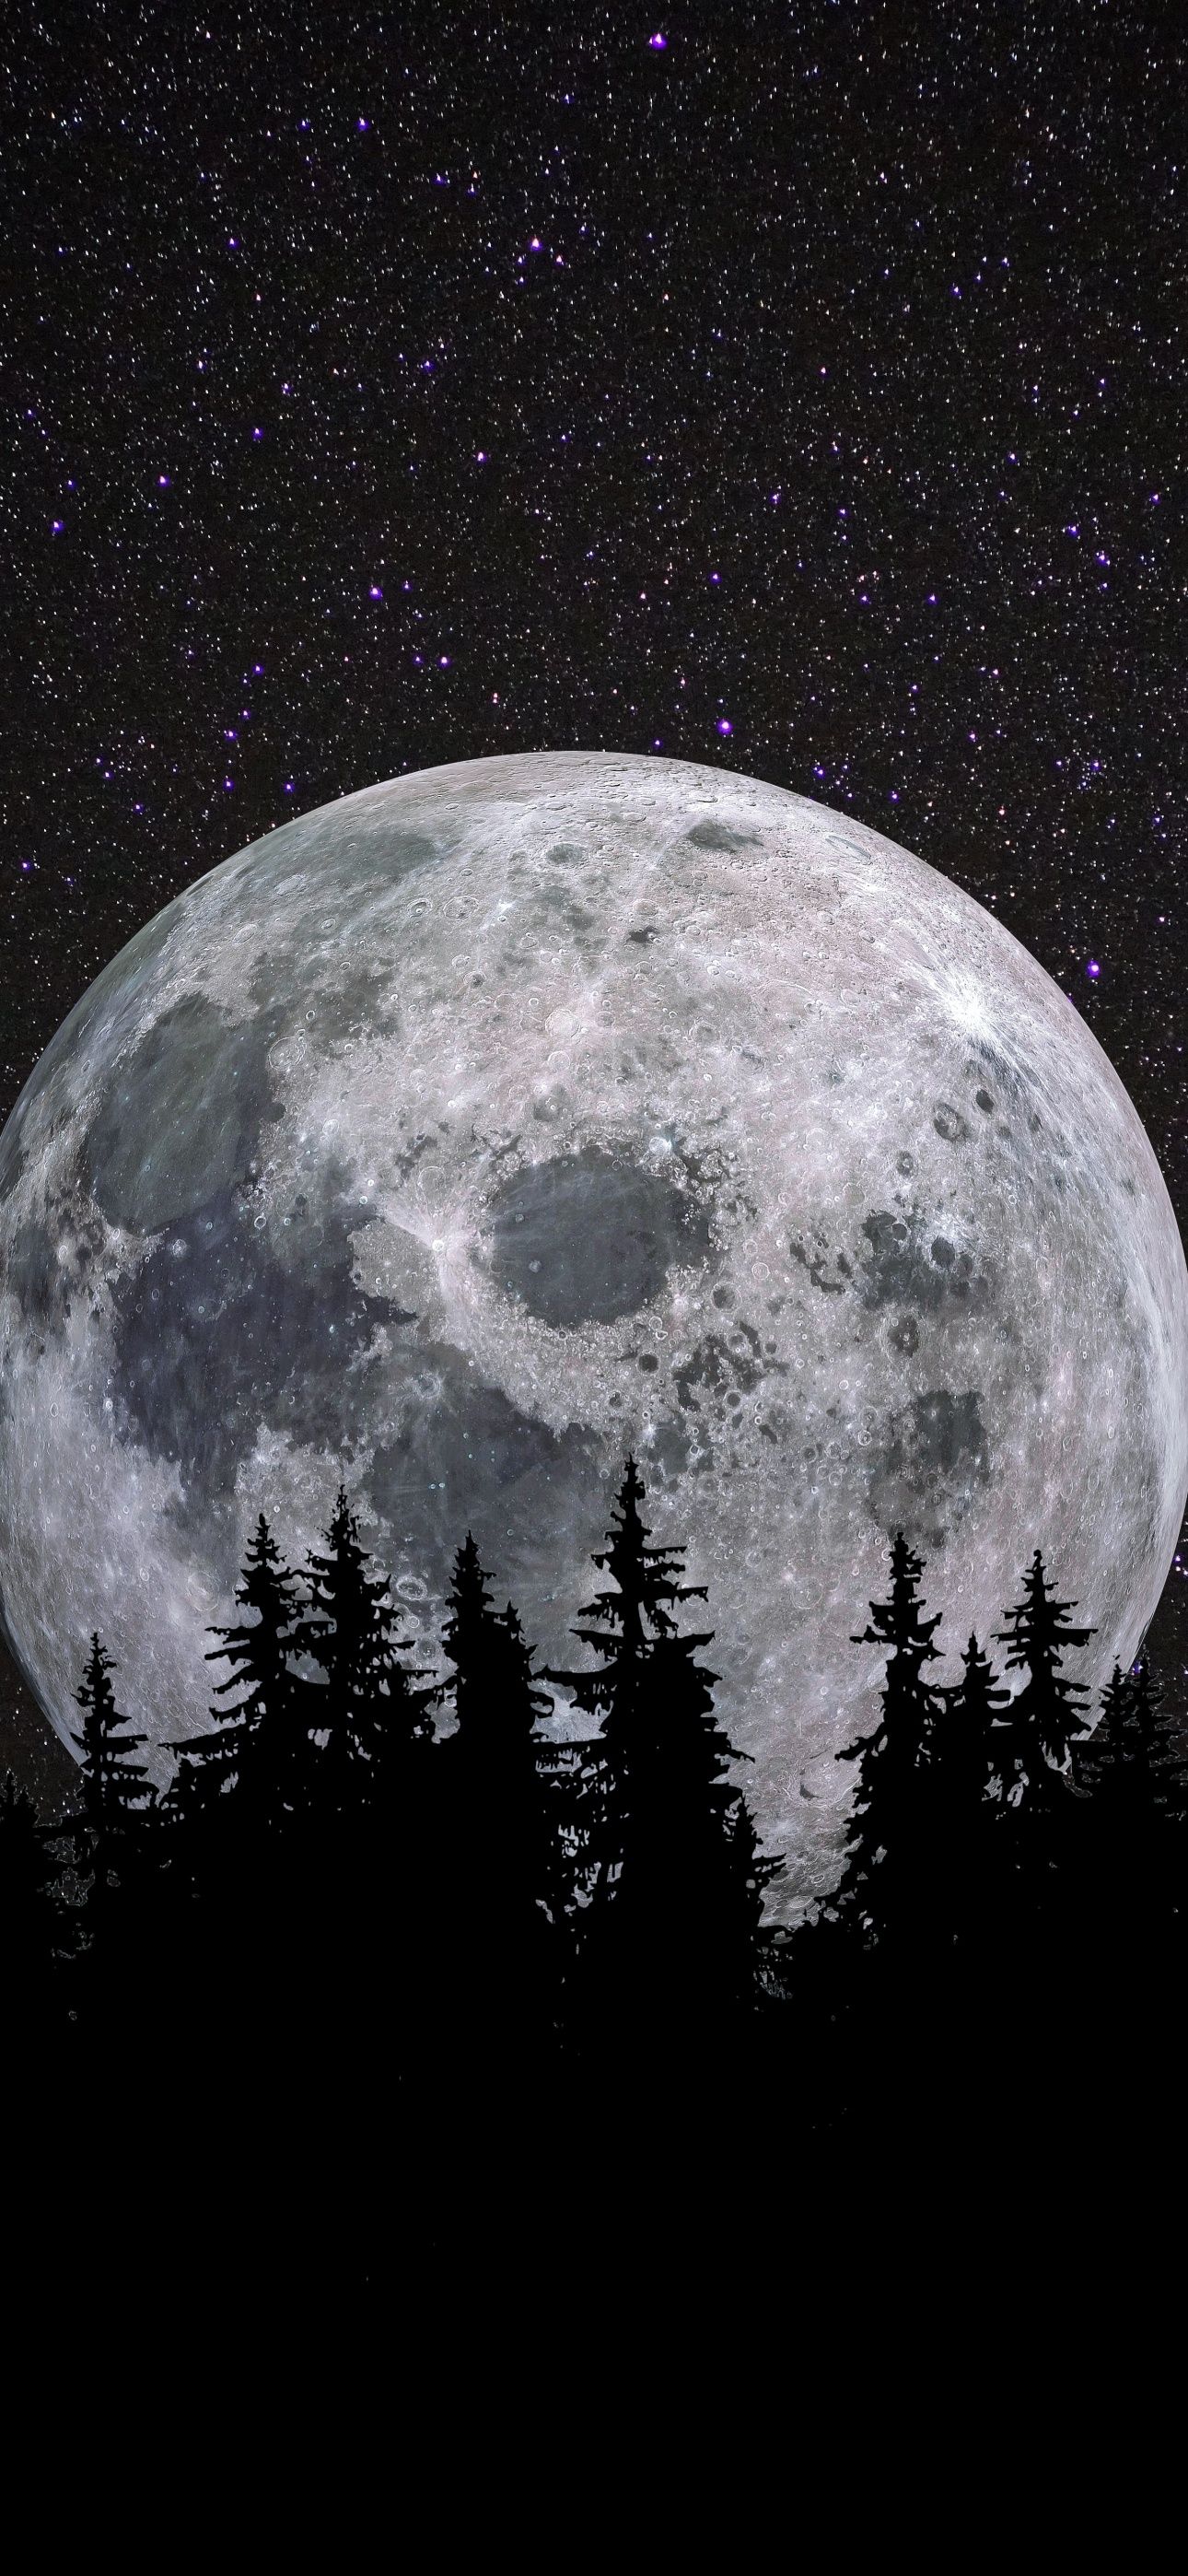 The full moon over the forest wallpaper 1080x1920 for iPhone 8 - Moon